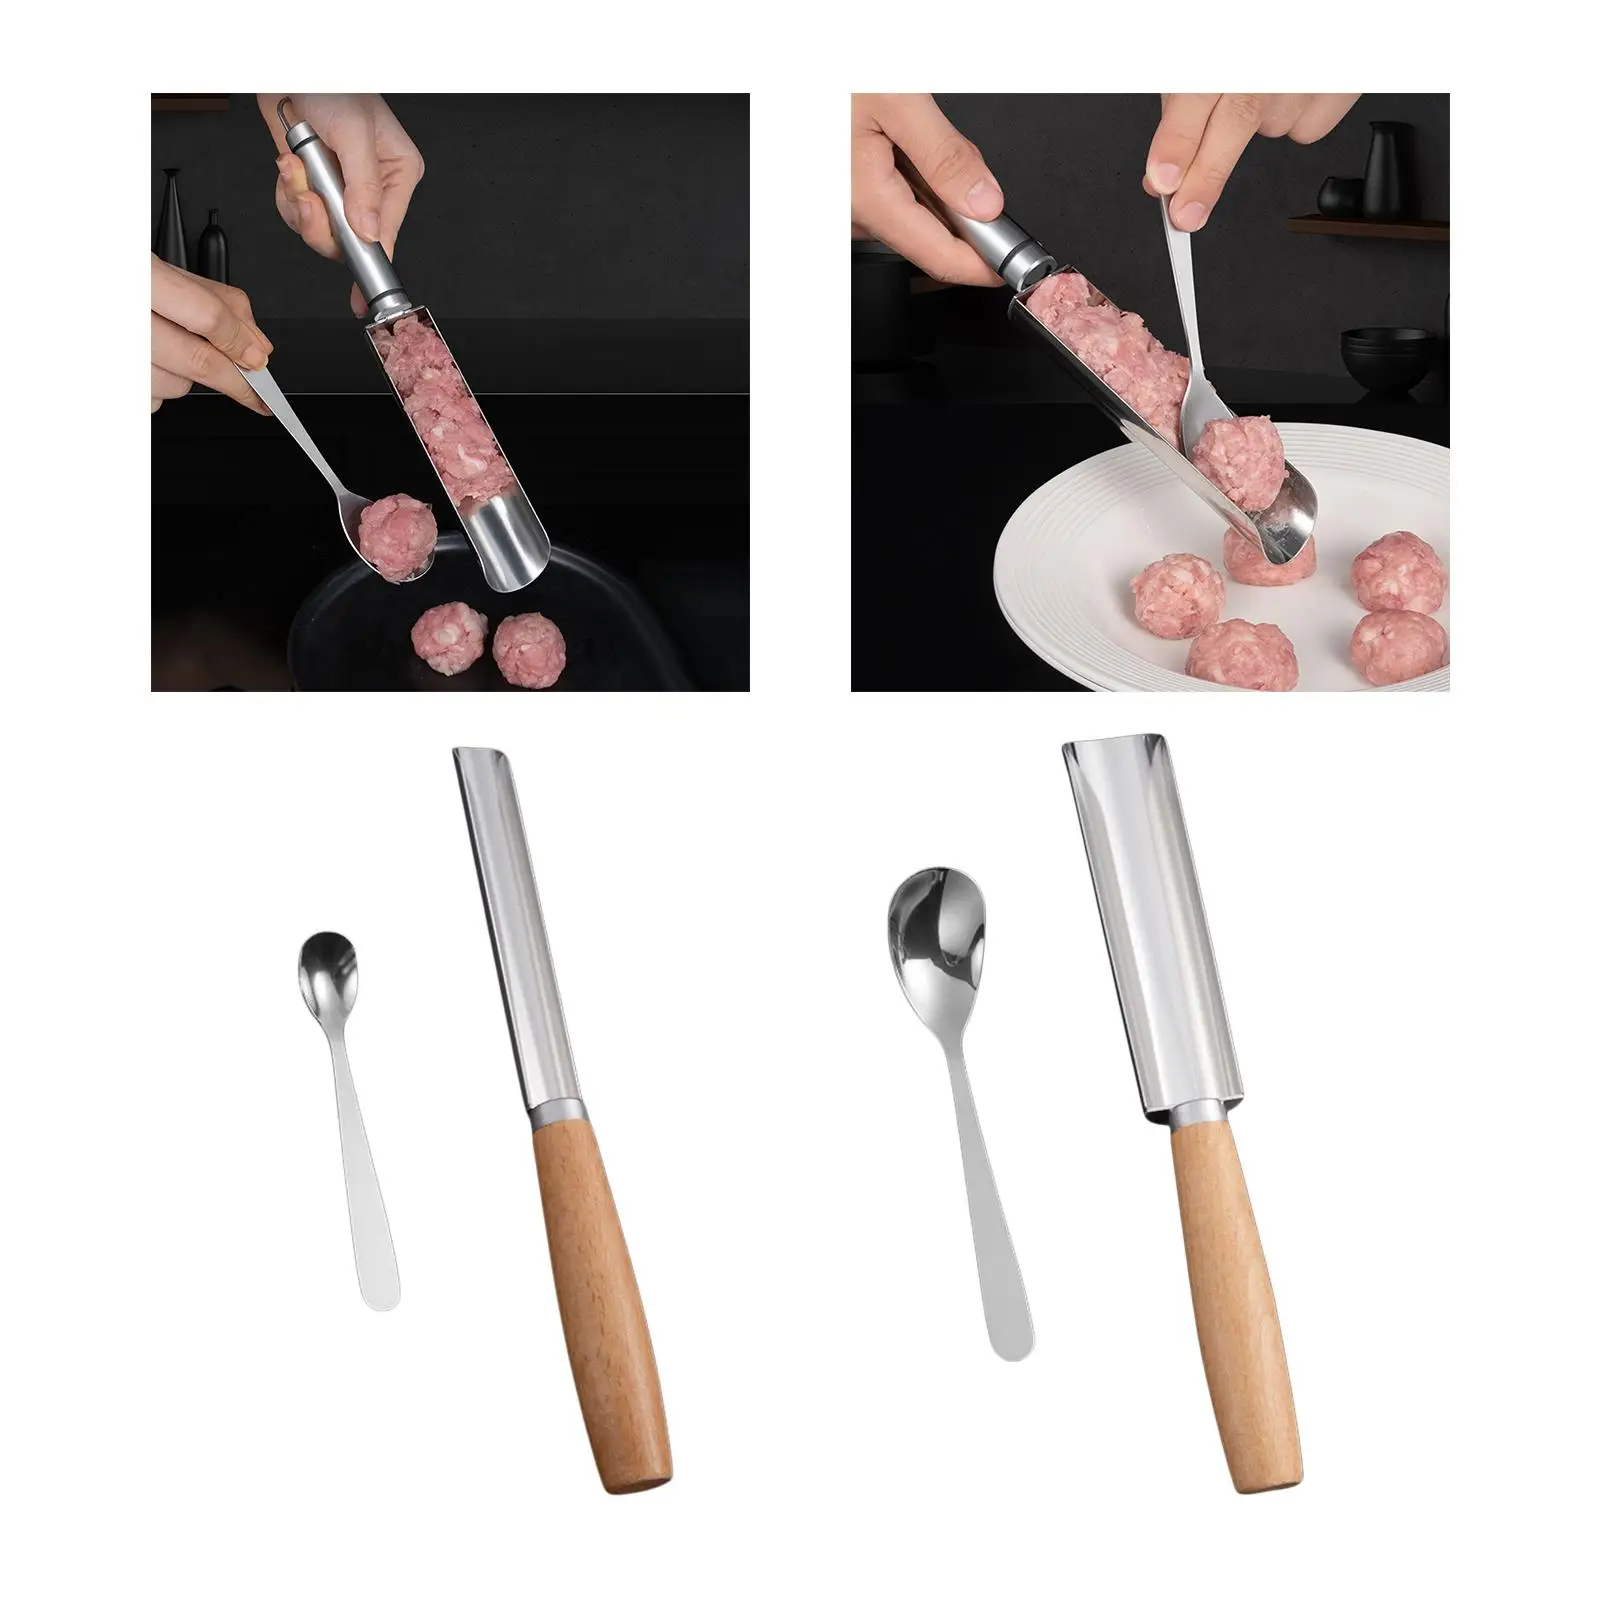 Meatball Maker Kitchen Tool Cakes Scoop Ball Maker Household Mould for Fish Ball Beef Meat Ball Cooking Hotels Restaurants